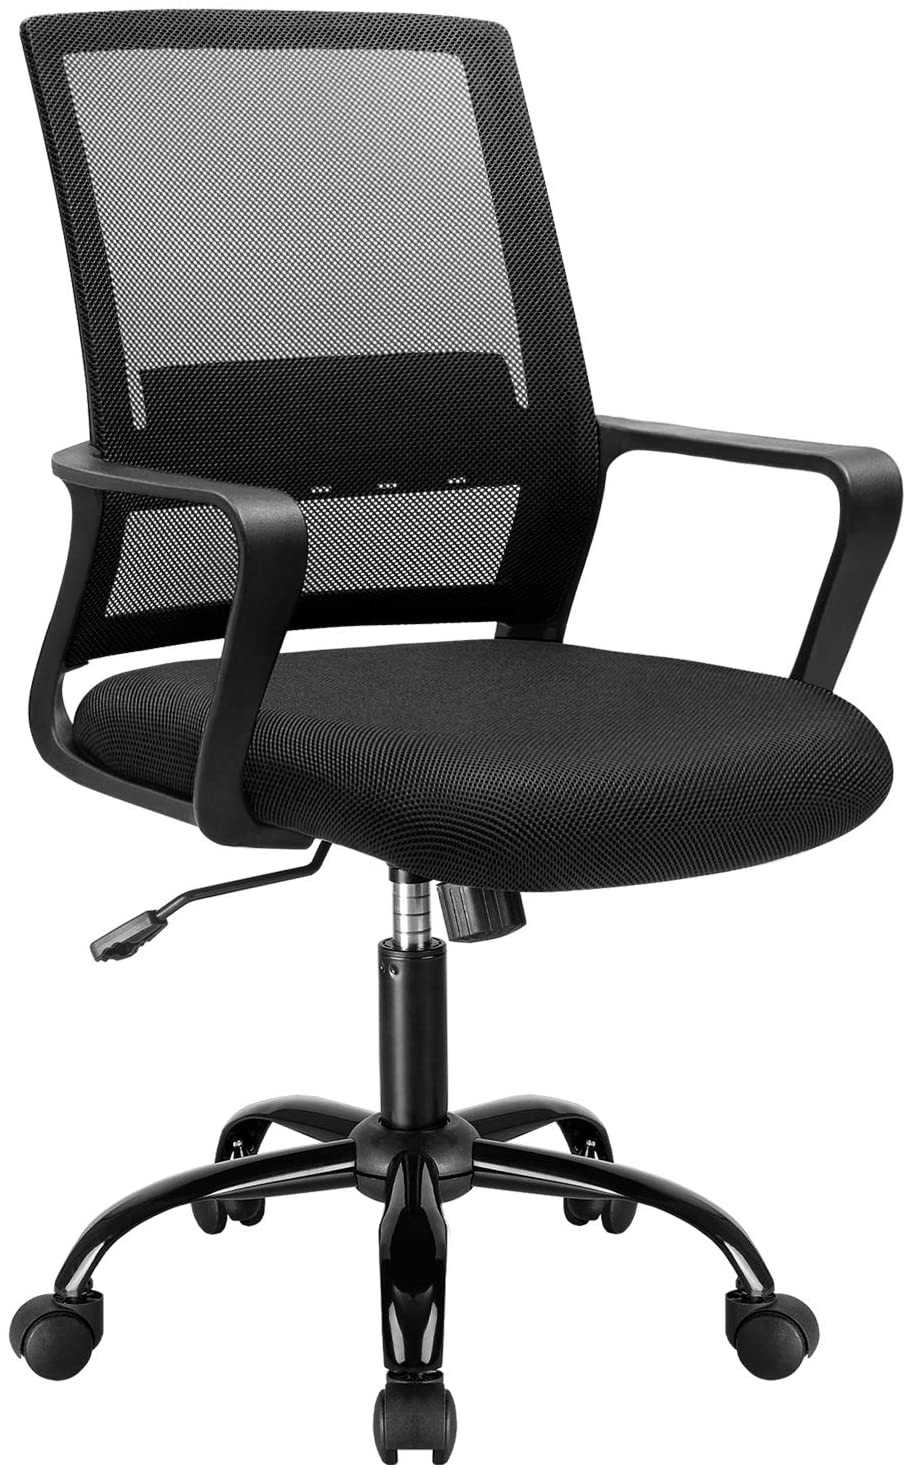 Office Chair Mid Back Mesh Chair Ergonomic Lumbar Support Desk Chair Swivel Computer Task Chair Modern Executive Chair with Armrests (Black)